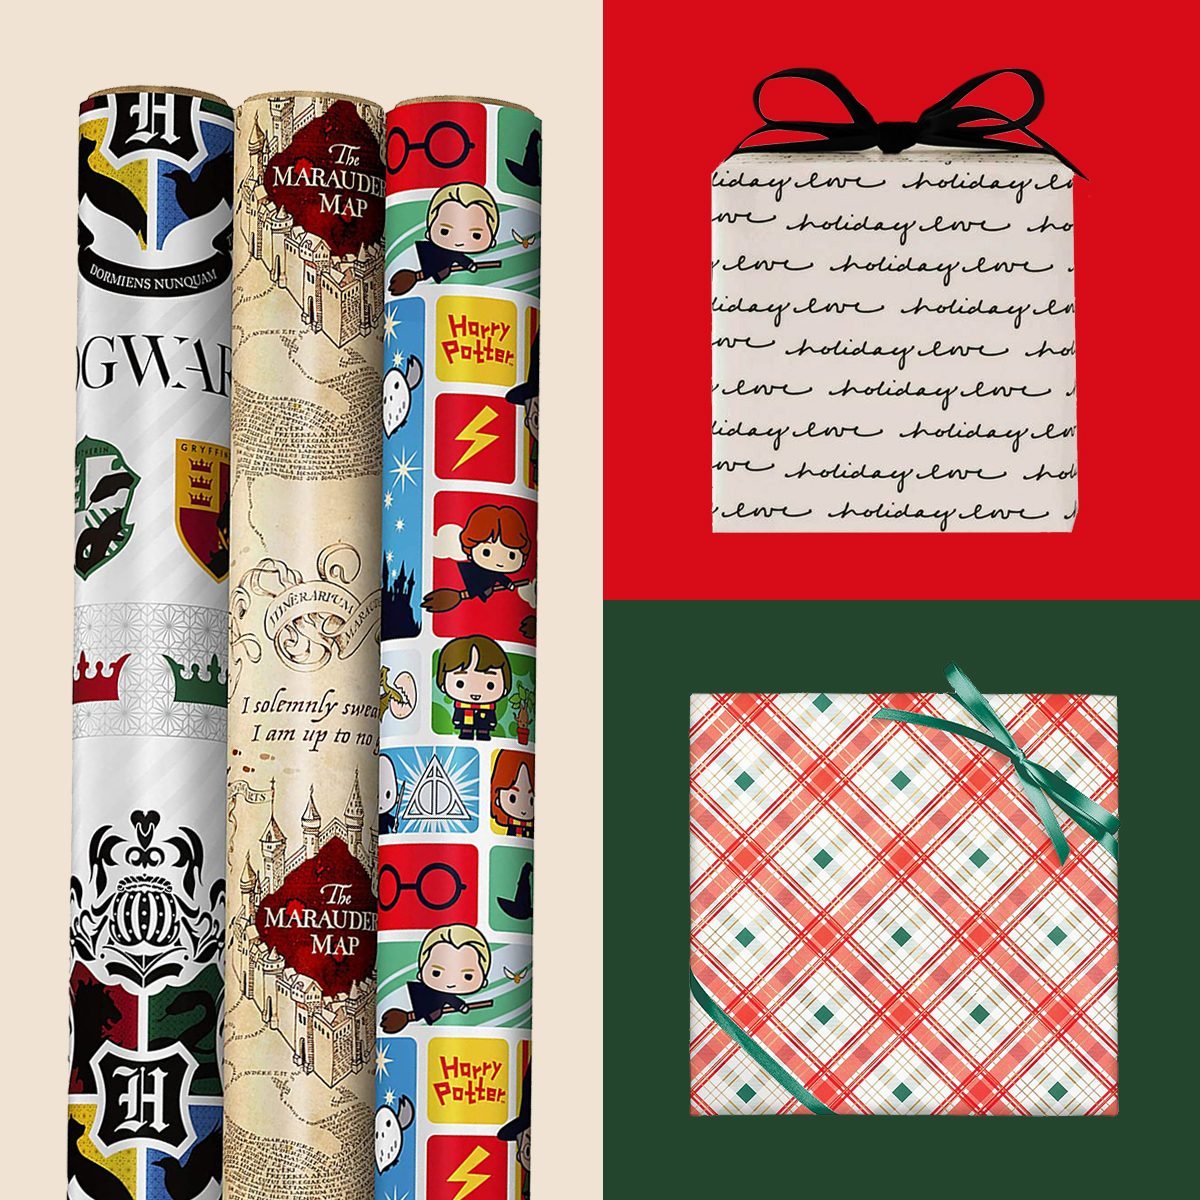 Nutcracker Wrapping Paper Roll, Black Christmas Wrapping Paper